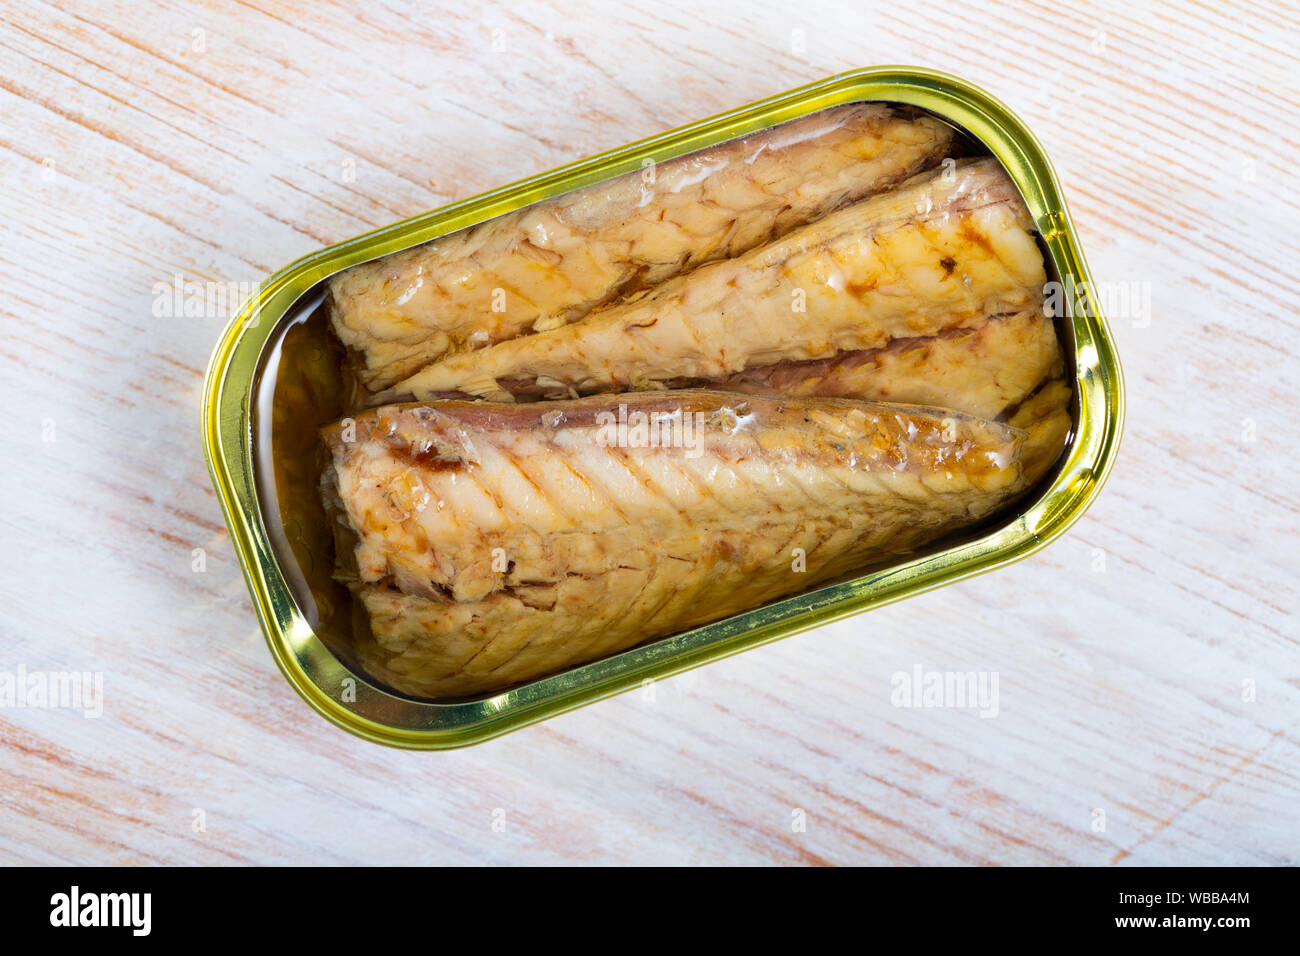 Image of  deliciously tinned sprats fillet of mackerel  in sunflower oil Stock Photo